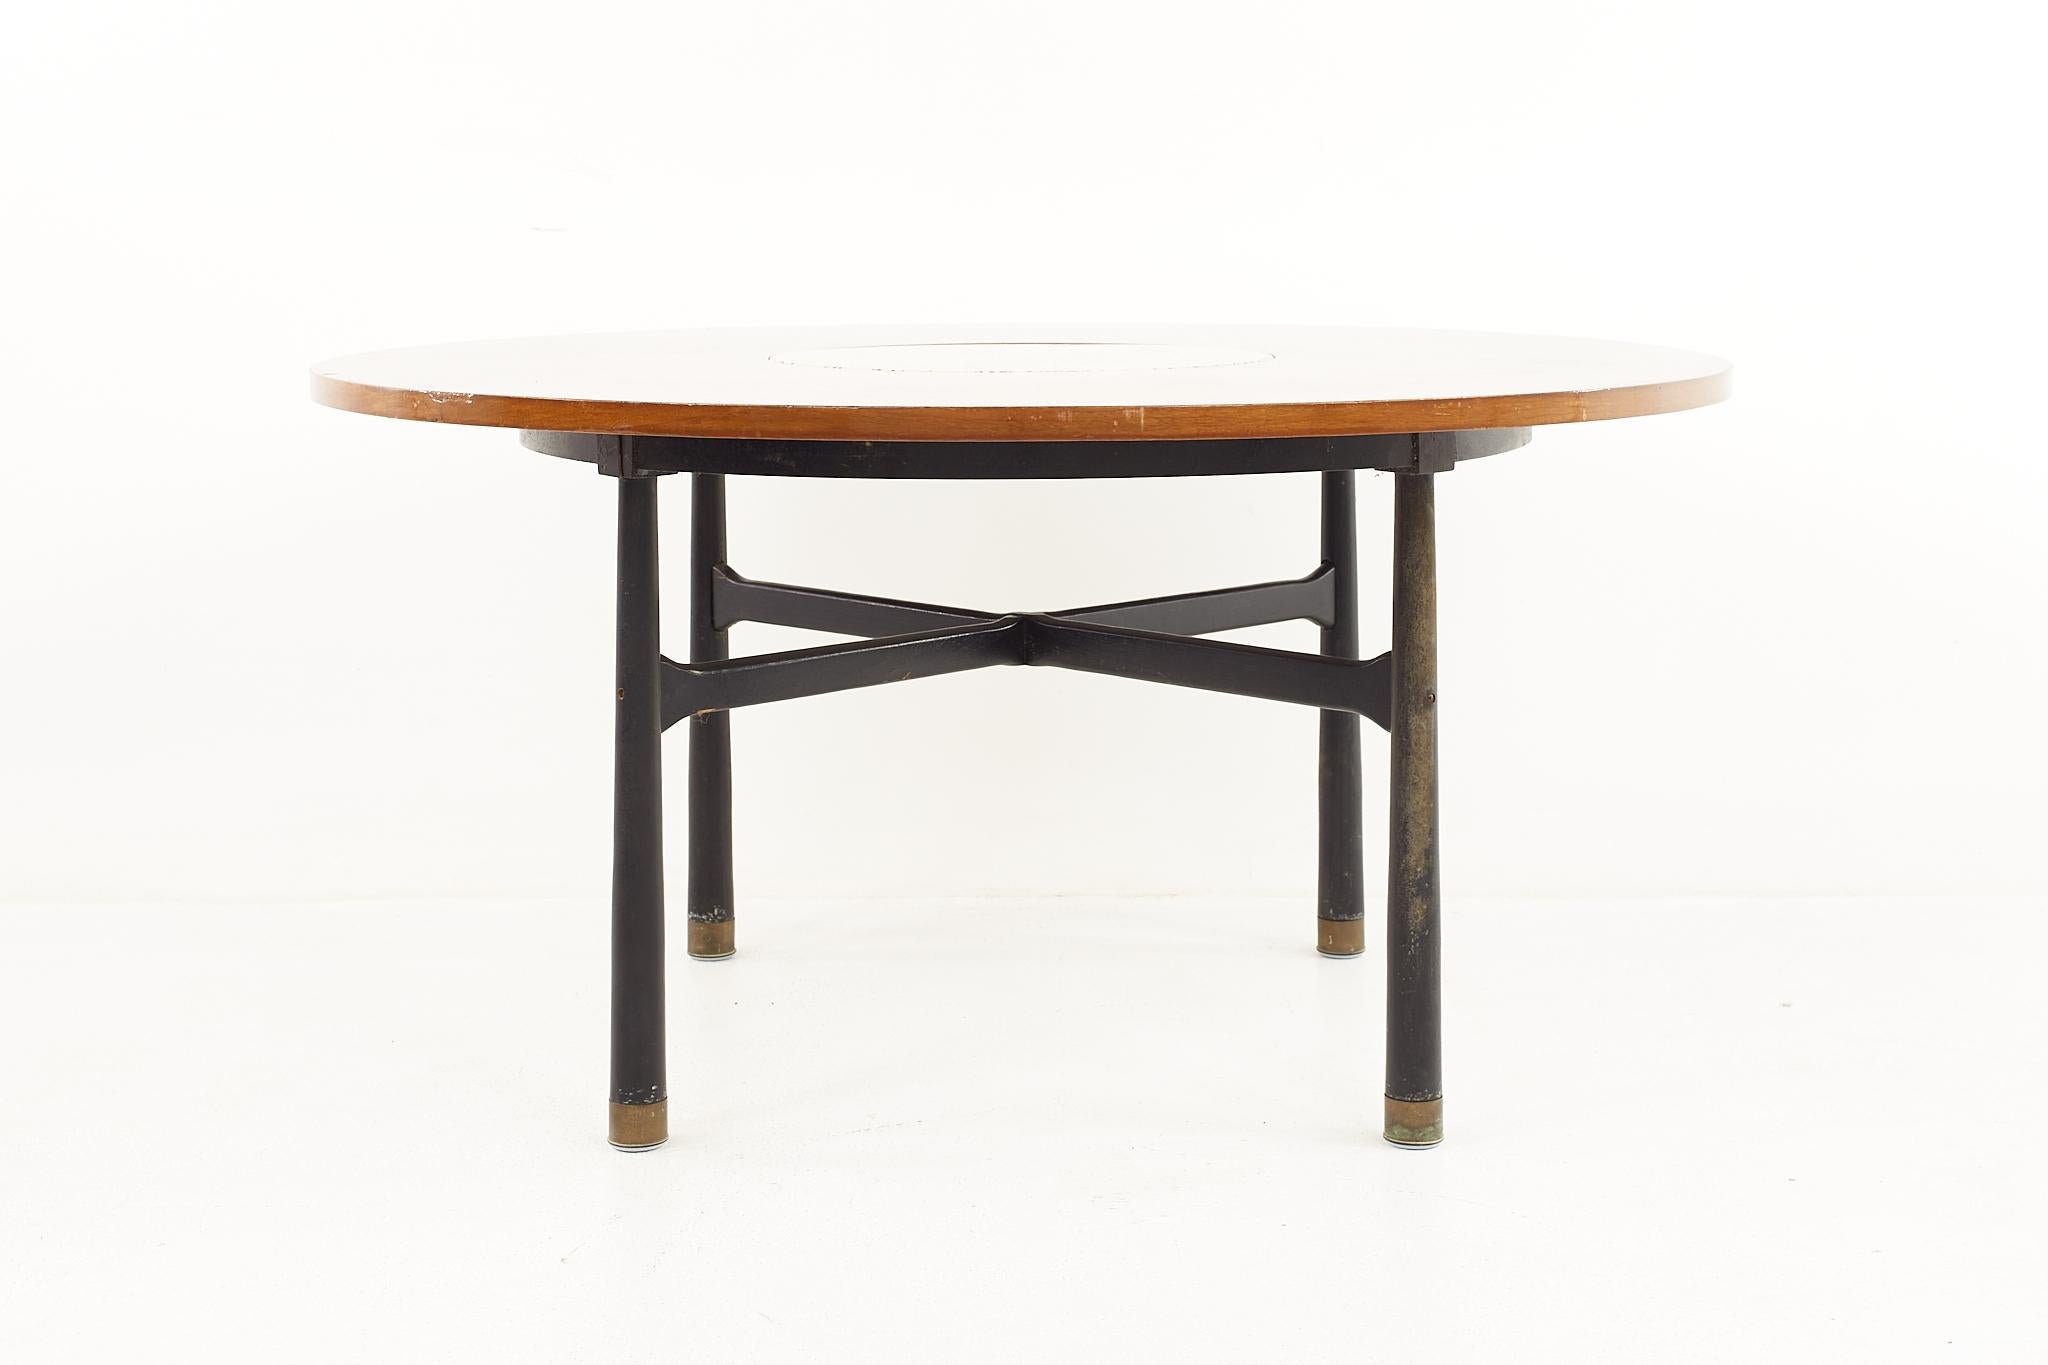 Harvey Probber mid century round ebonized walnut, terrazzo, and brass dining table

The table measures: 50 wide x 50 deep x 24.5 high, with a chair clearance of 23.25 inches 

Repair has been made to the terrazzo.

All pieces of furniture can